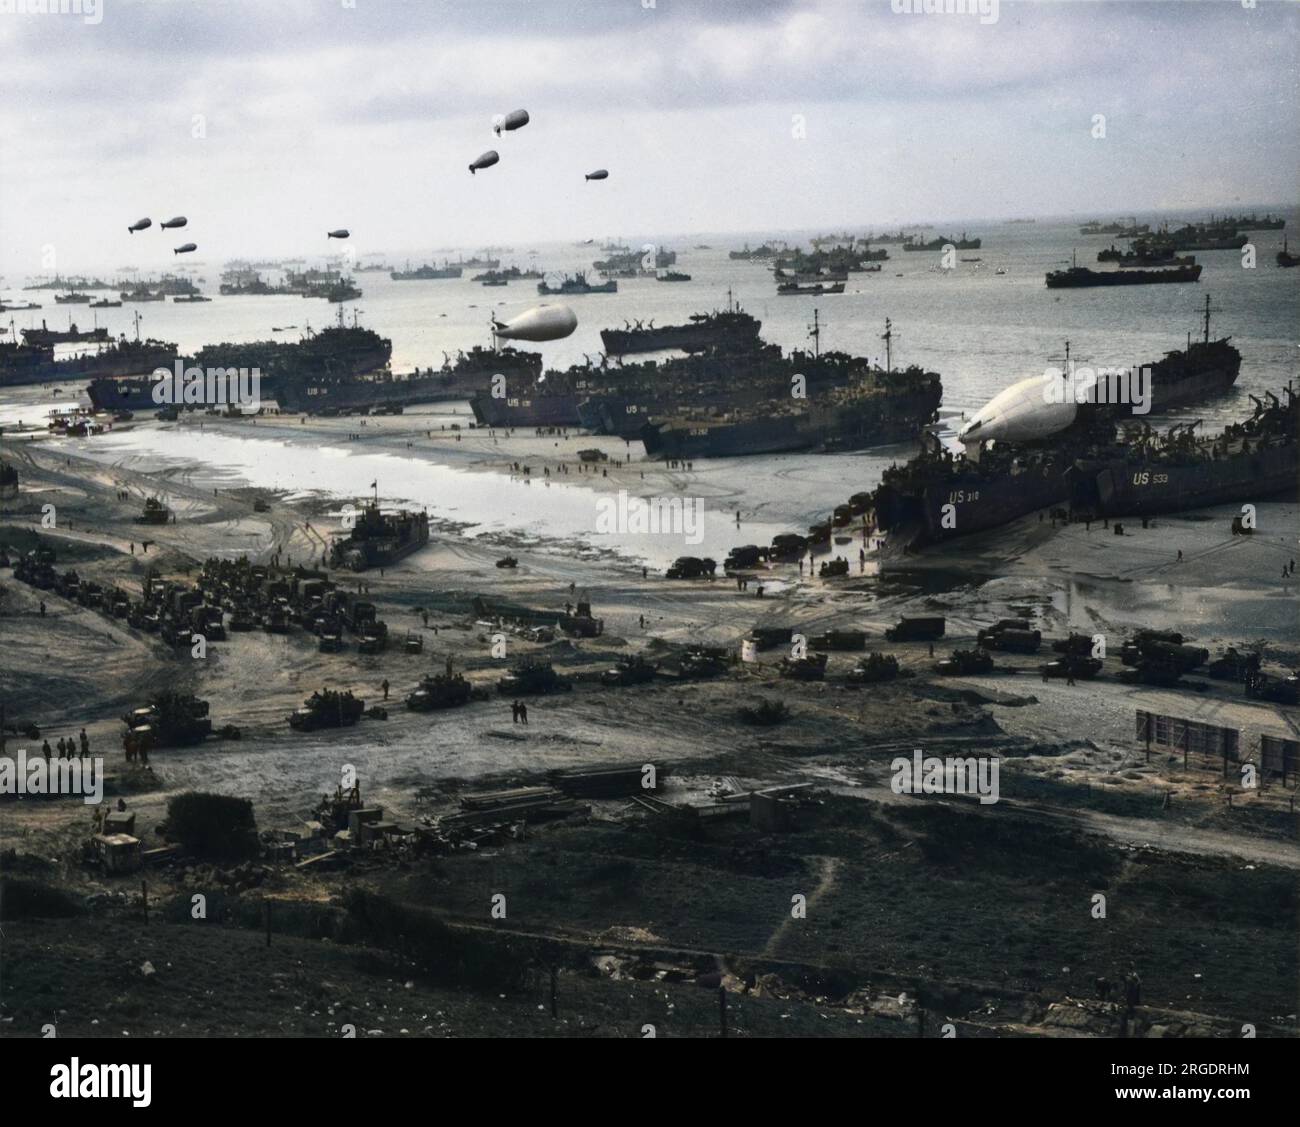 A stunning panorama photograph of a French invasion beach with the channel waters thick with US military shipping, as reinforcements and supplies are funneled ashore following the conquest of the Cherbourg peninsula. Barrage balloons protect the ships from enemy strafing. One balloon still rests on the deck of large landing vehicle. Trucks filled with supplies and troops head inland across the beach. D-Day began on June 6th, 1944 at 6:30am and was conducted in two assault phases û the air assault landing of allied troops followed by an amphibious assault by infantry. The Normandy landings were Stock Photo